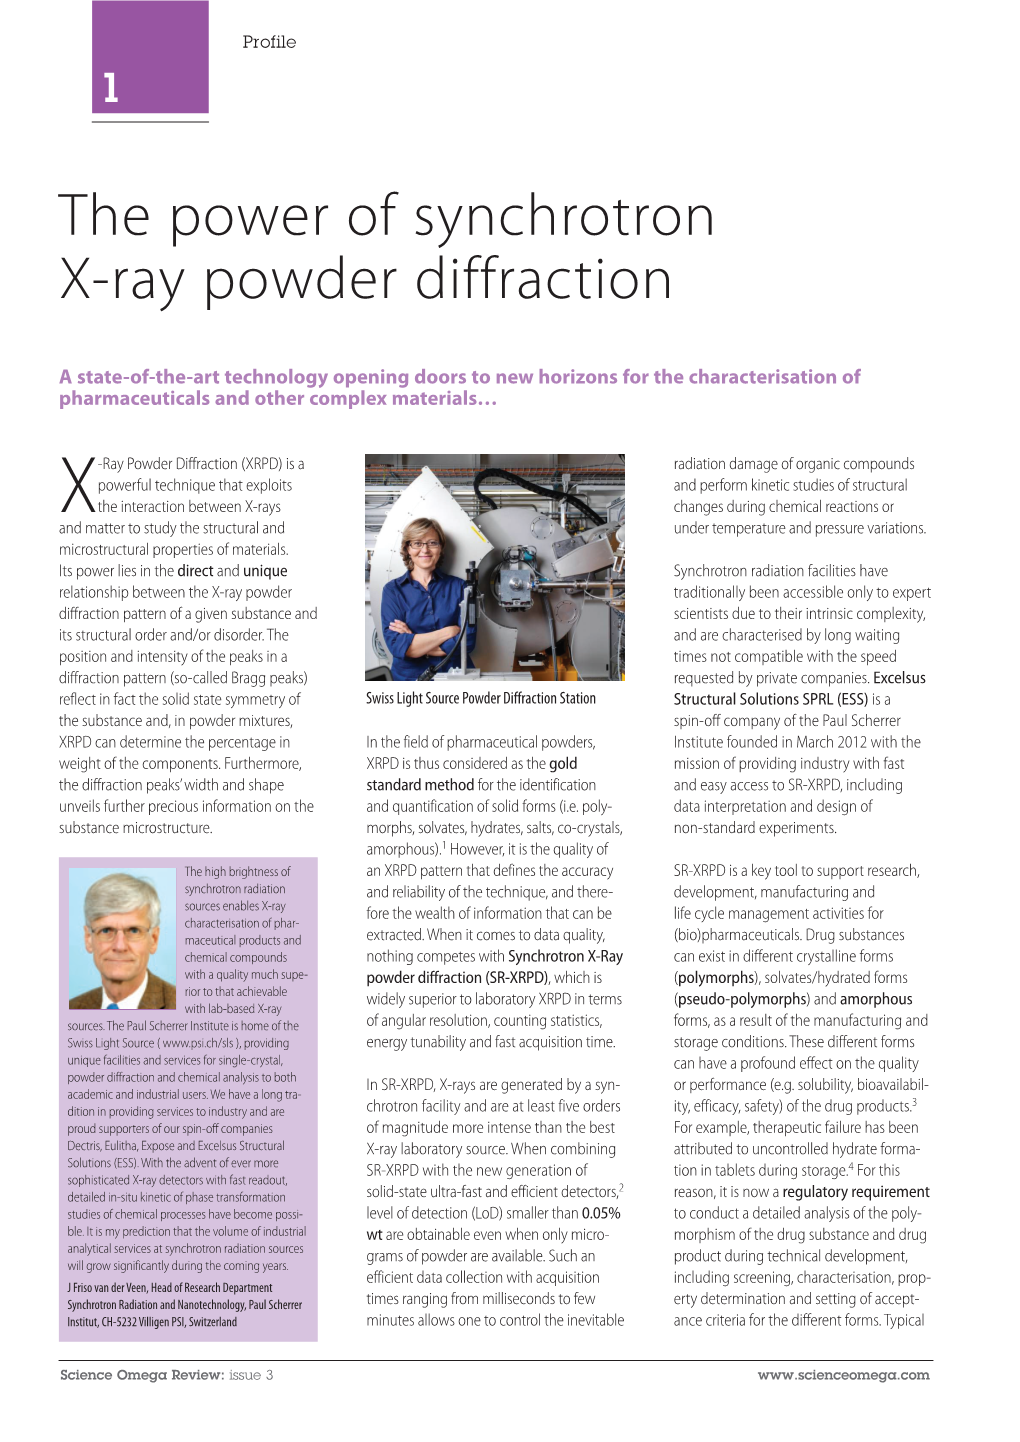 The Power of Synchrotron X-Ray Powder Diffraction